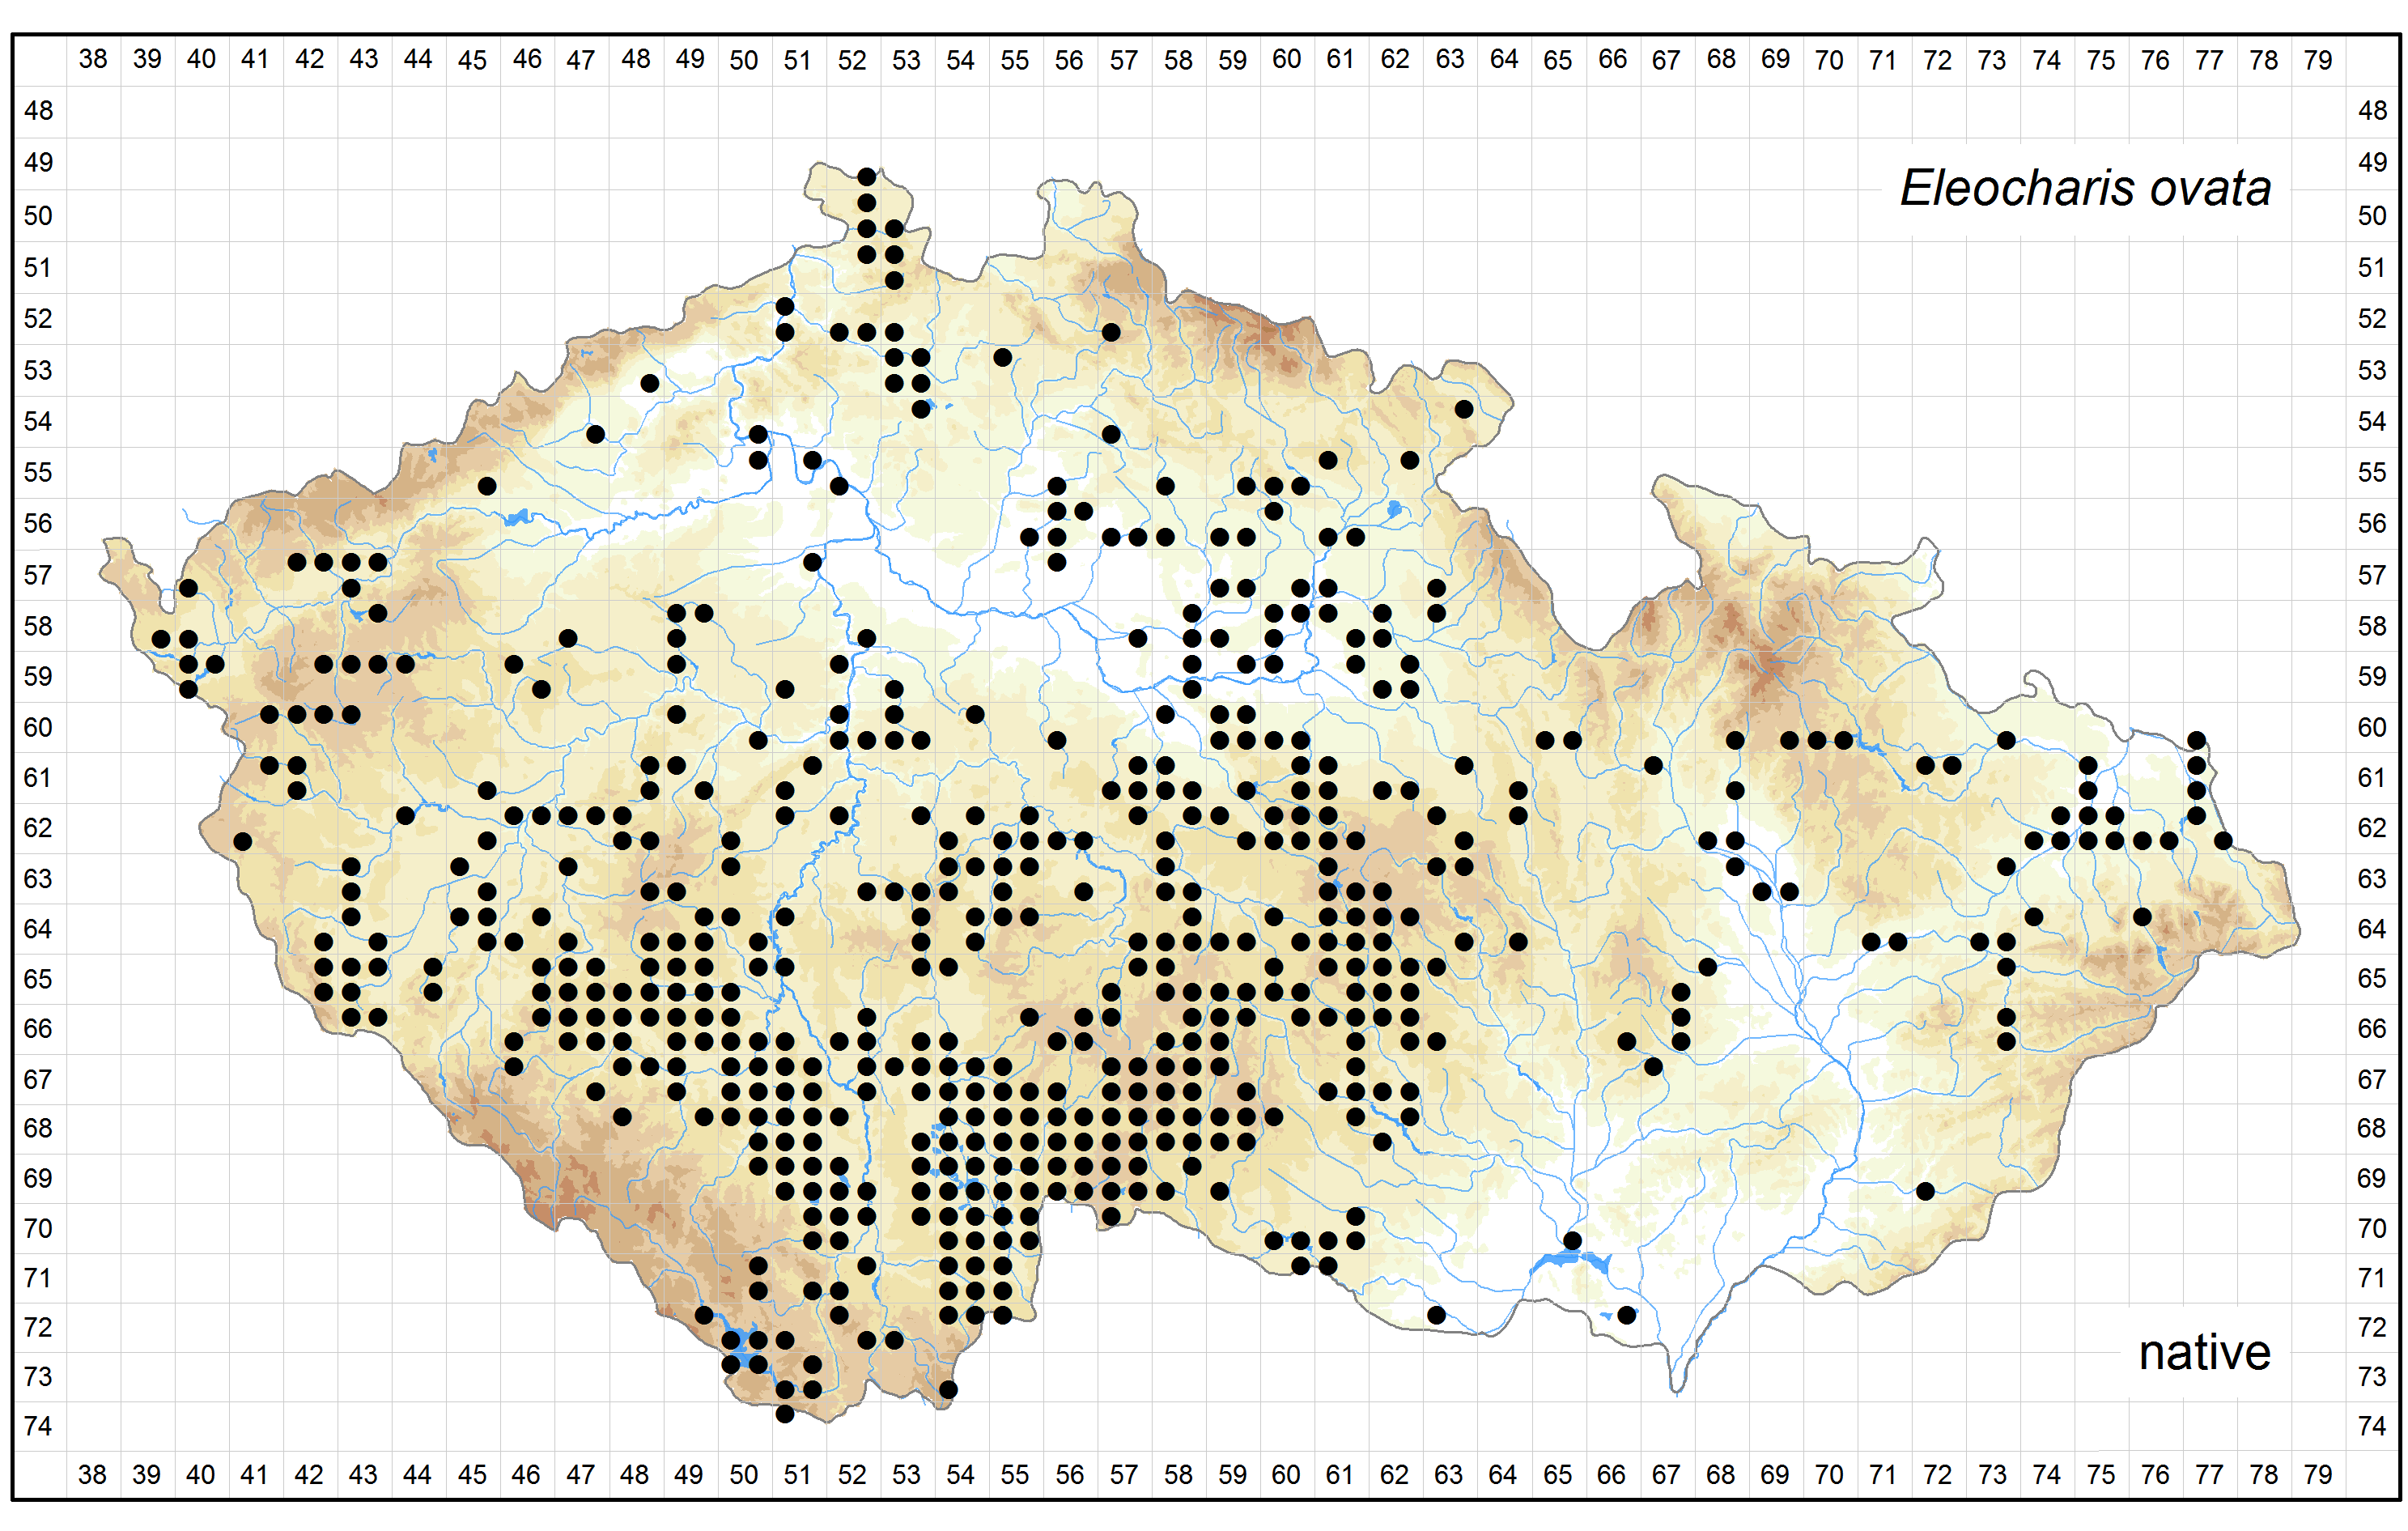 Distribution of Eleocharis ovata in the Czech Republic Author of the map: Petr Bureš Map produced on: 18-11-2015 Database records used for producing the distribution map of Eleocharis ovata published